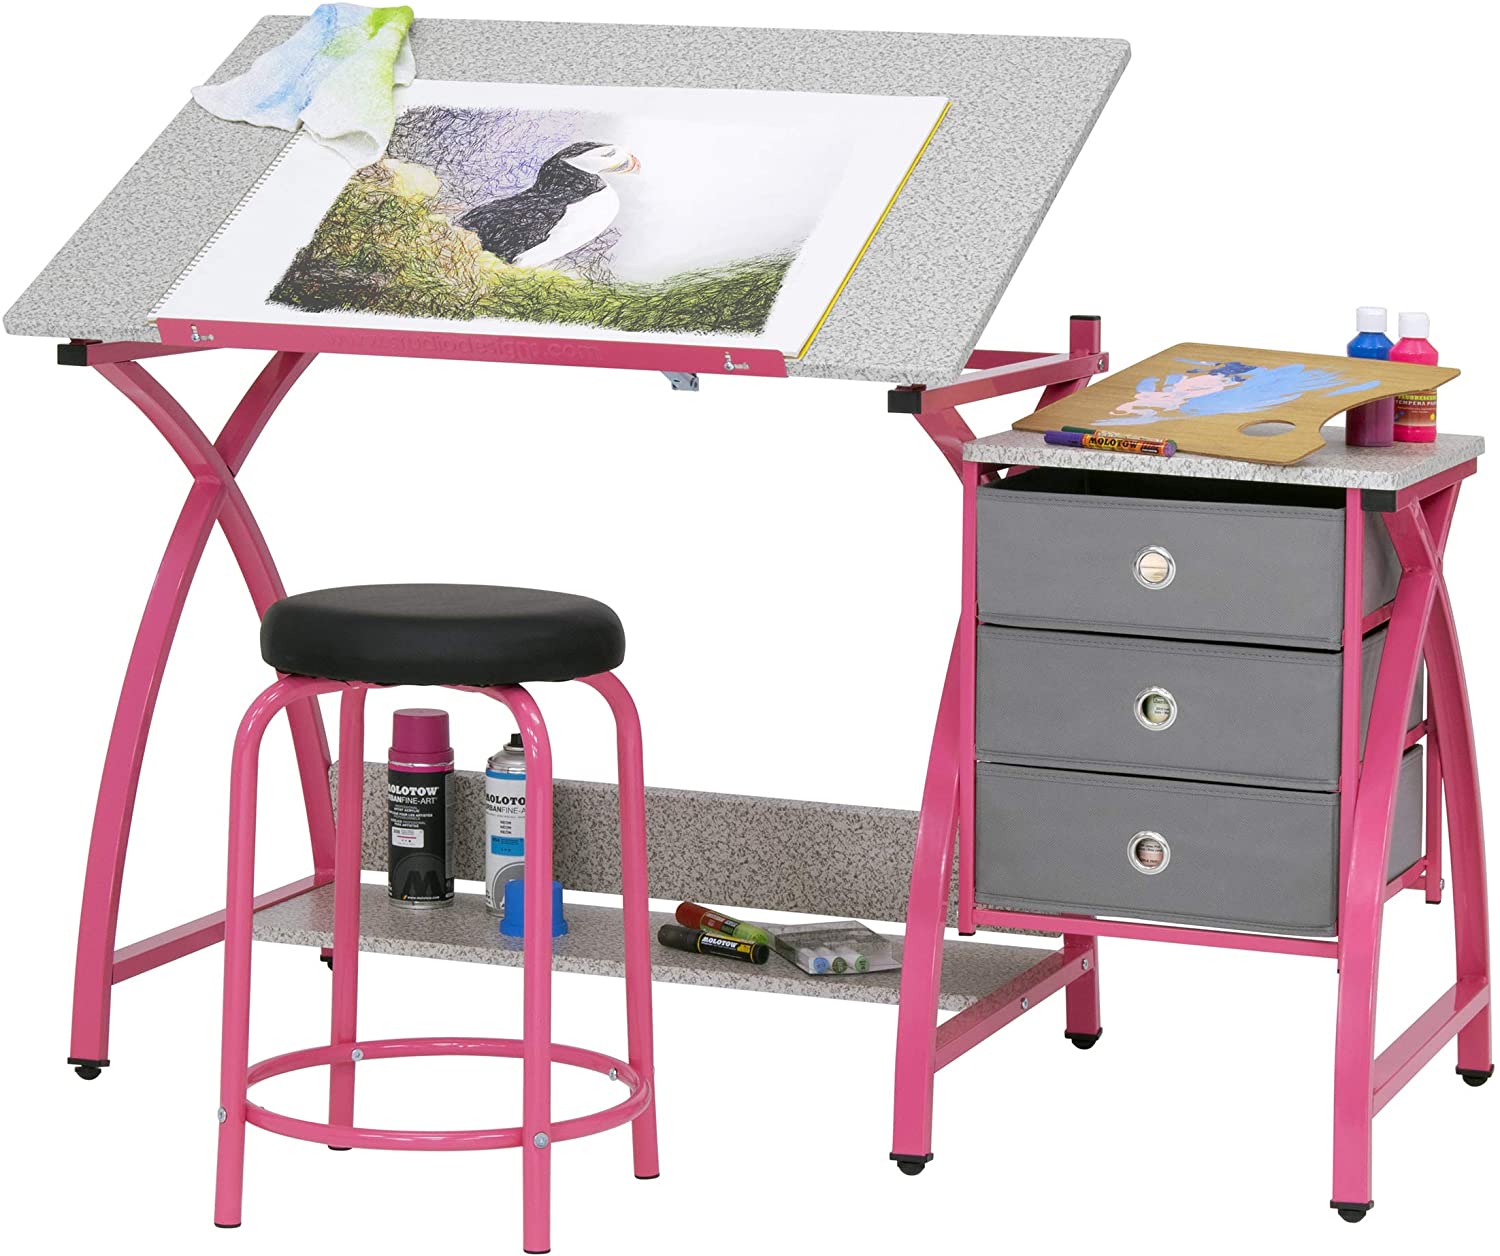 SD STUDIO DESIGNS Adjustable Angled Craft Table With Storage, 2-Piece